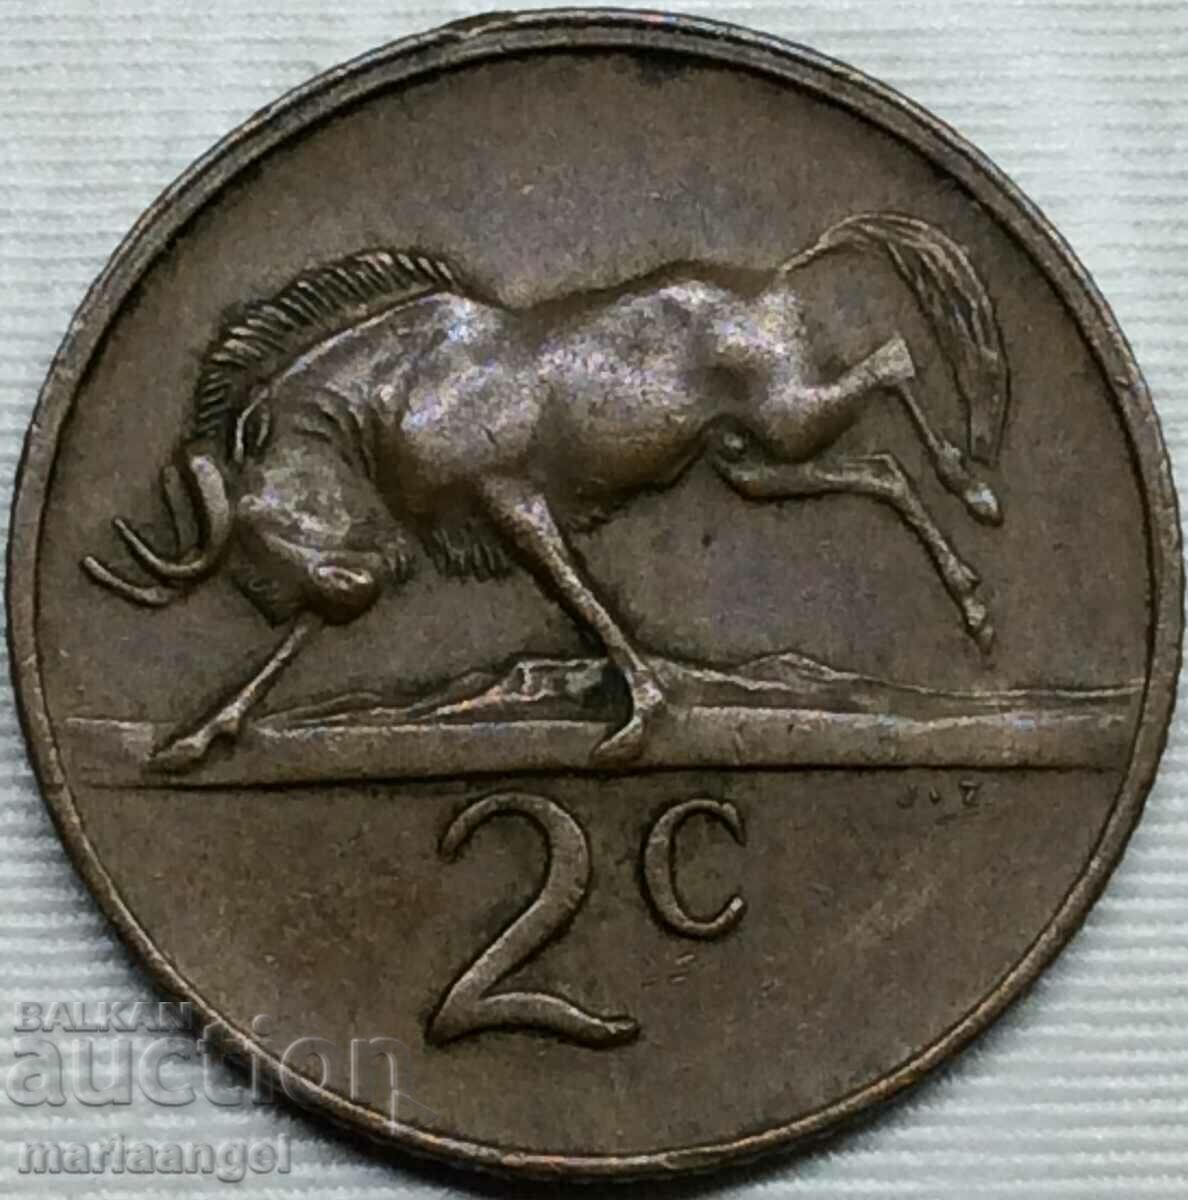 South Africa 1979 2 cents 22mm